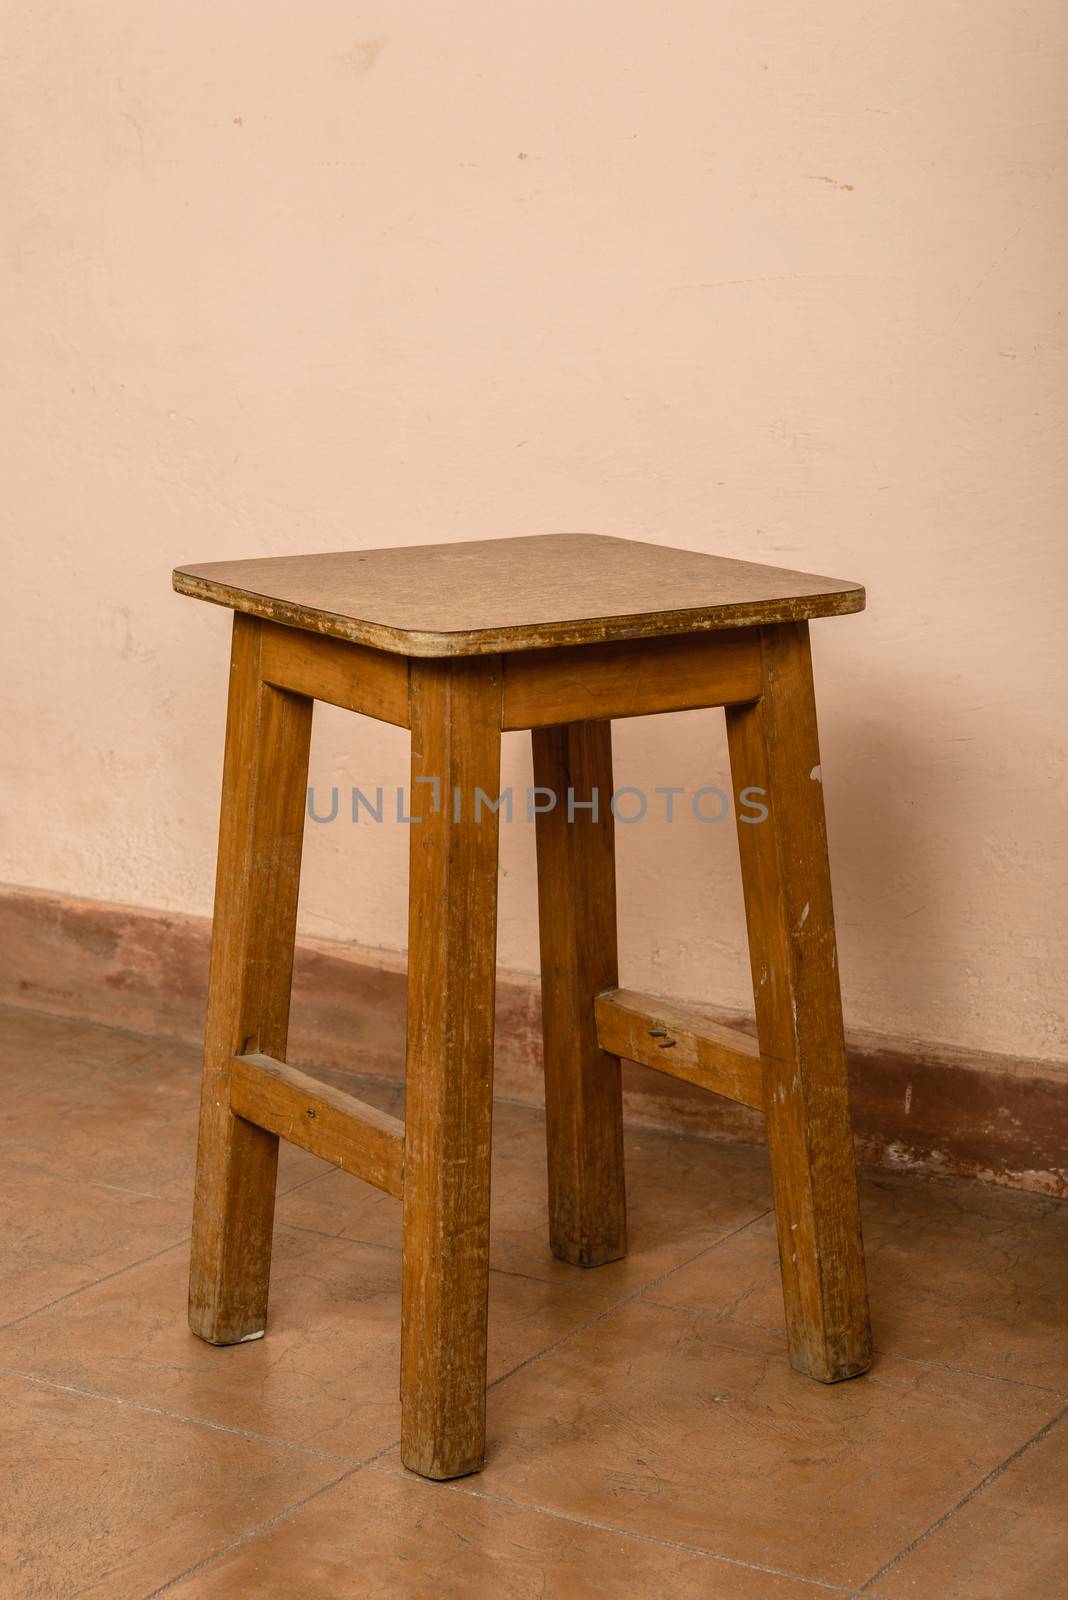 Rustic wood stool, pink wall background